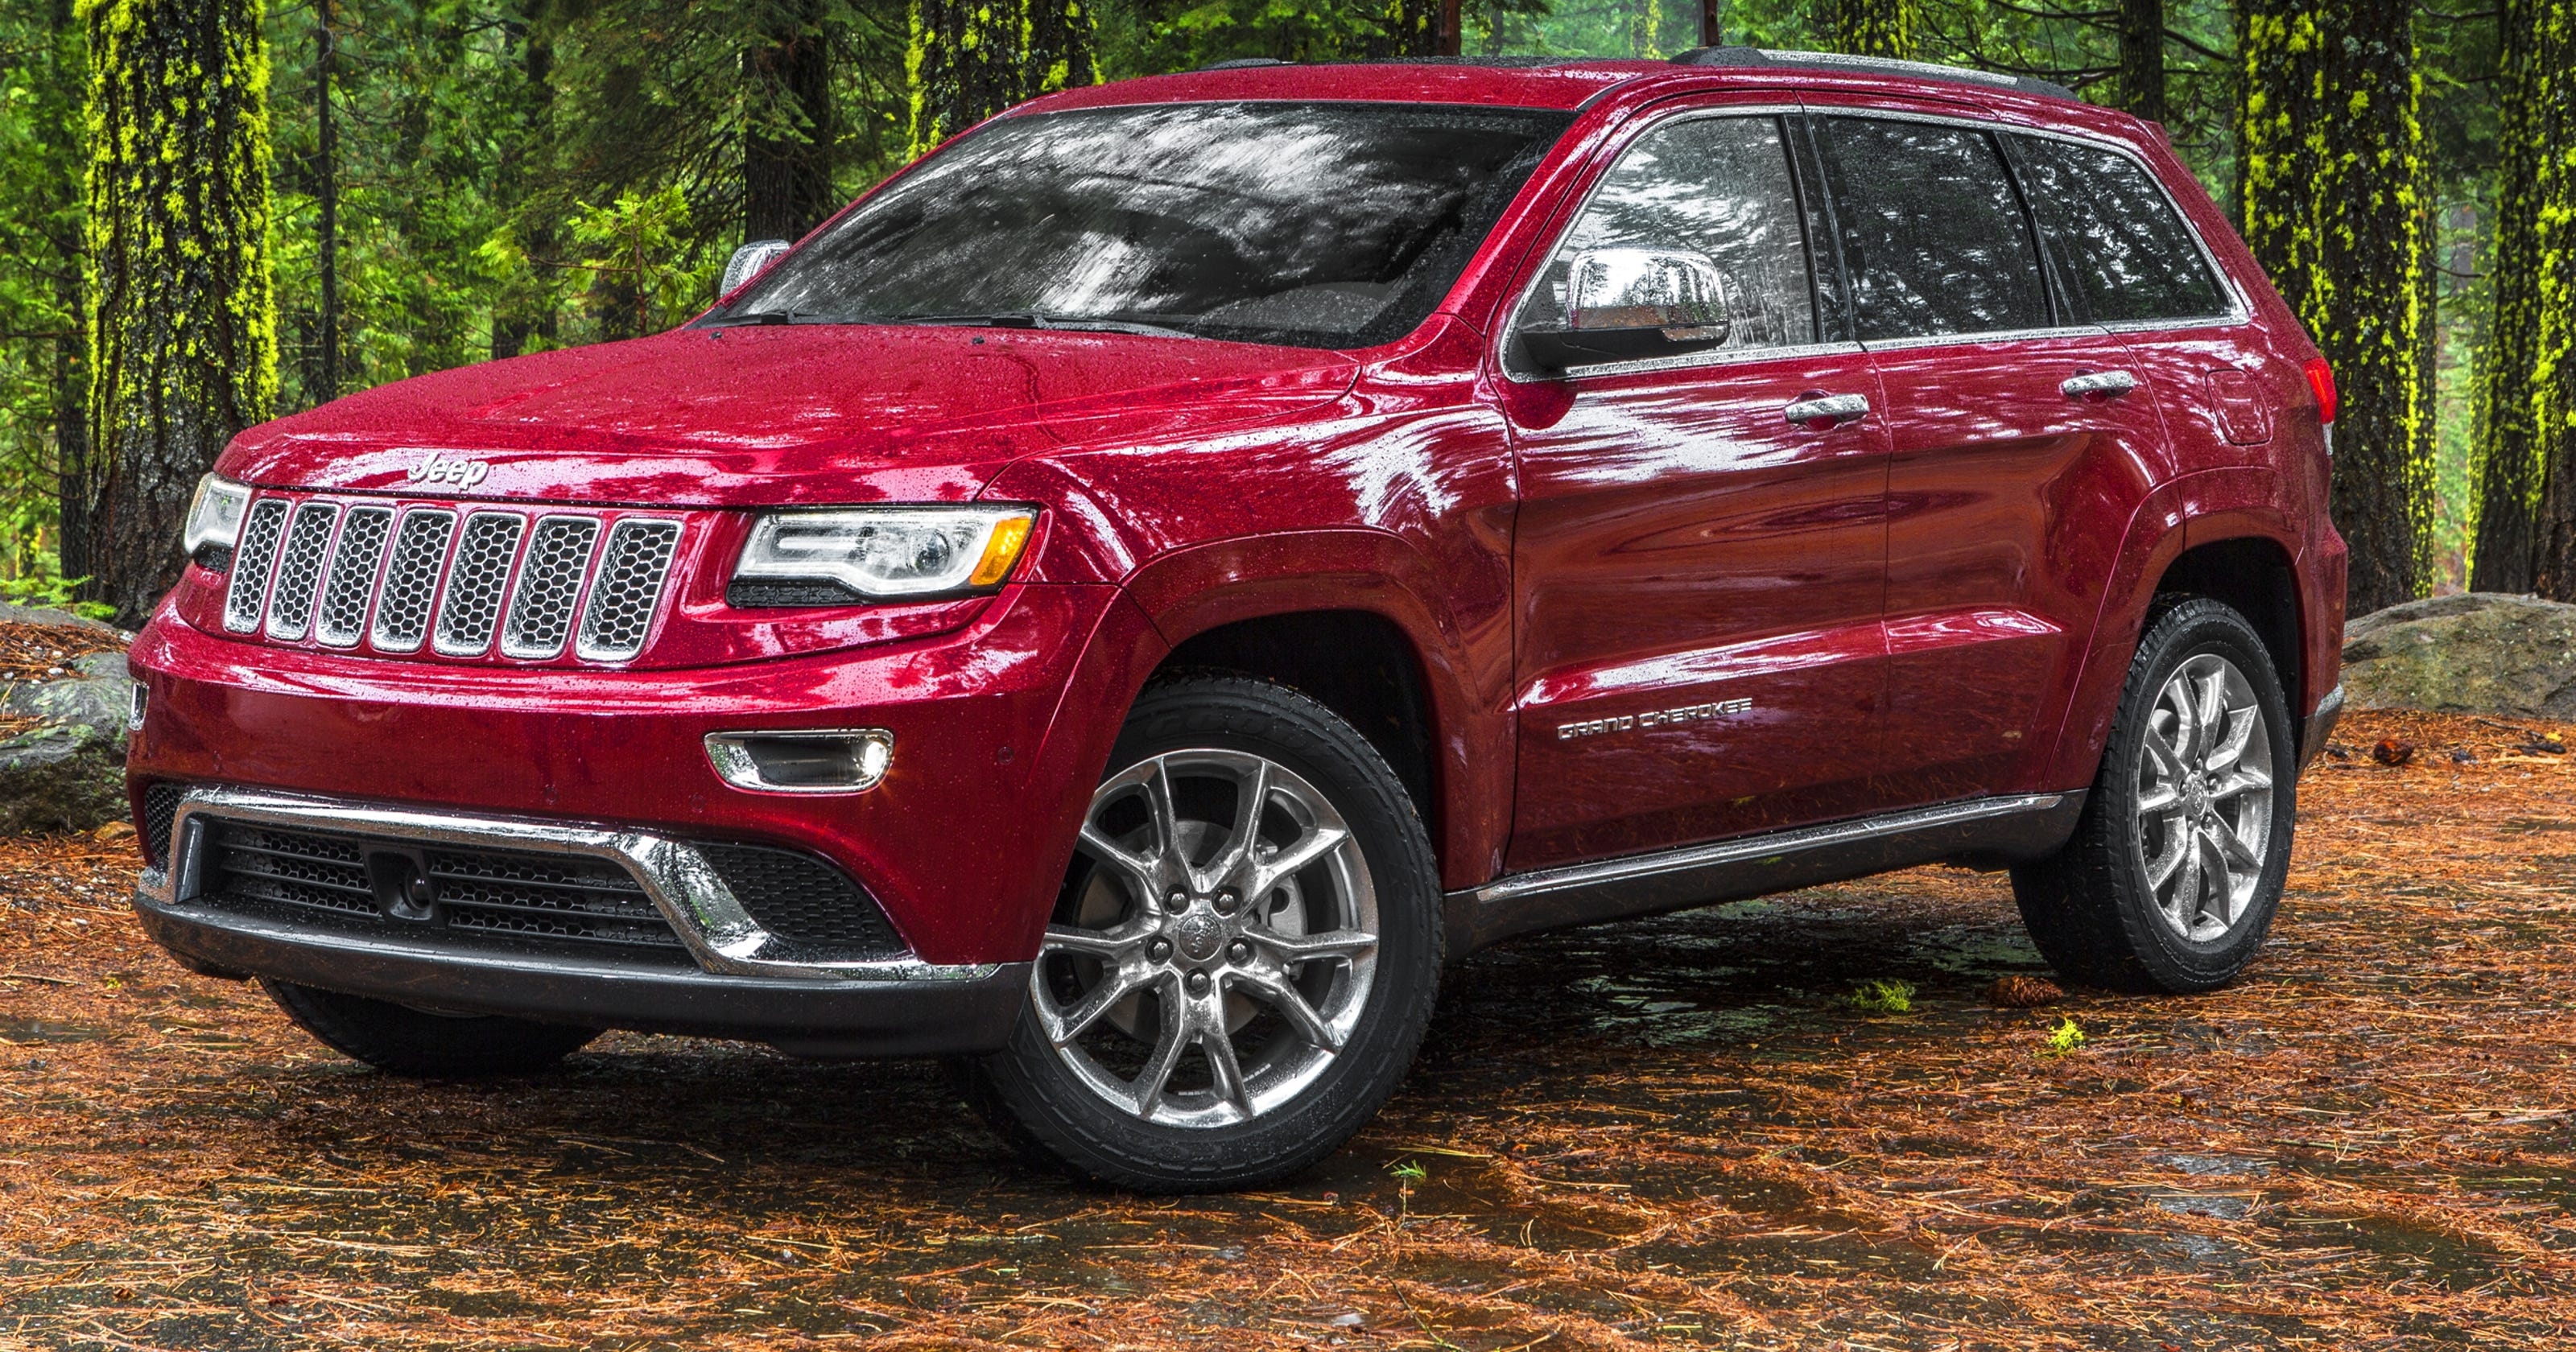 Jeep gives Grand Cherokee a redo, adds diesel option